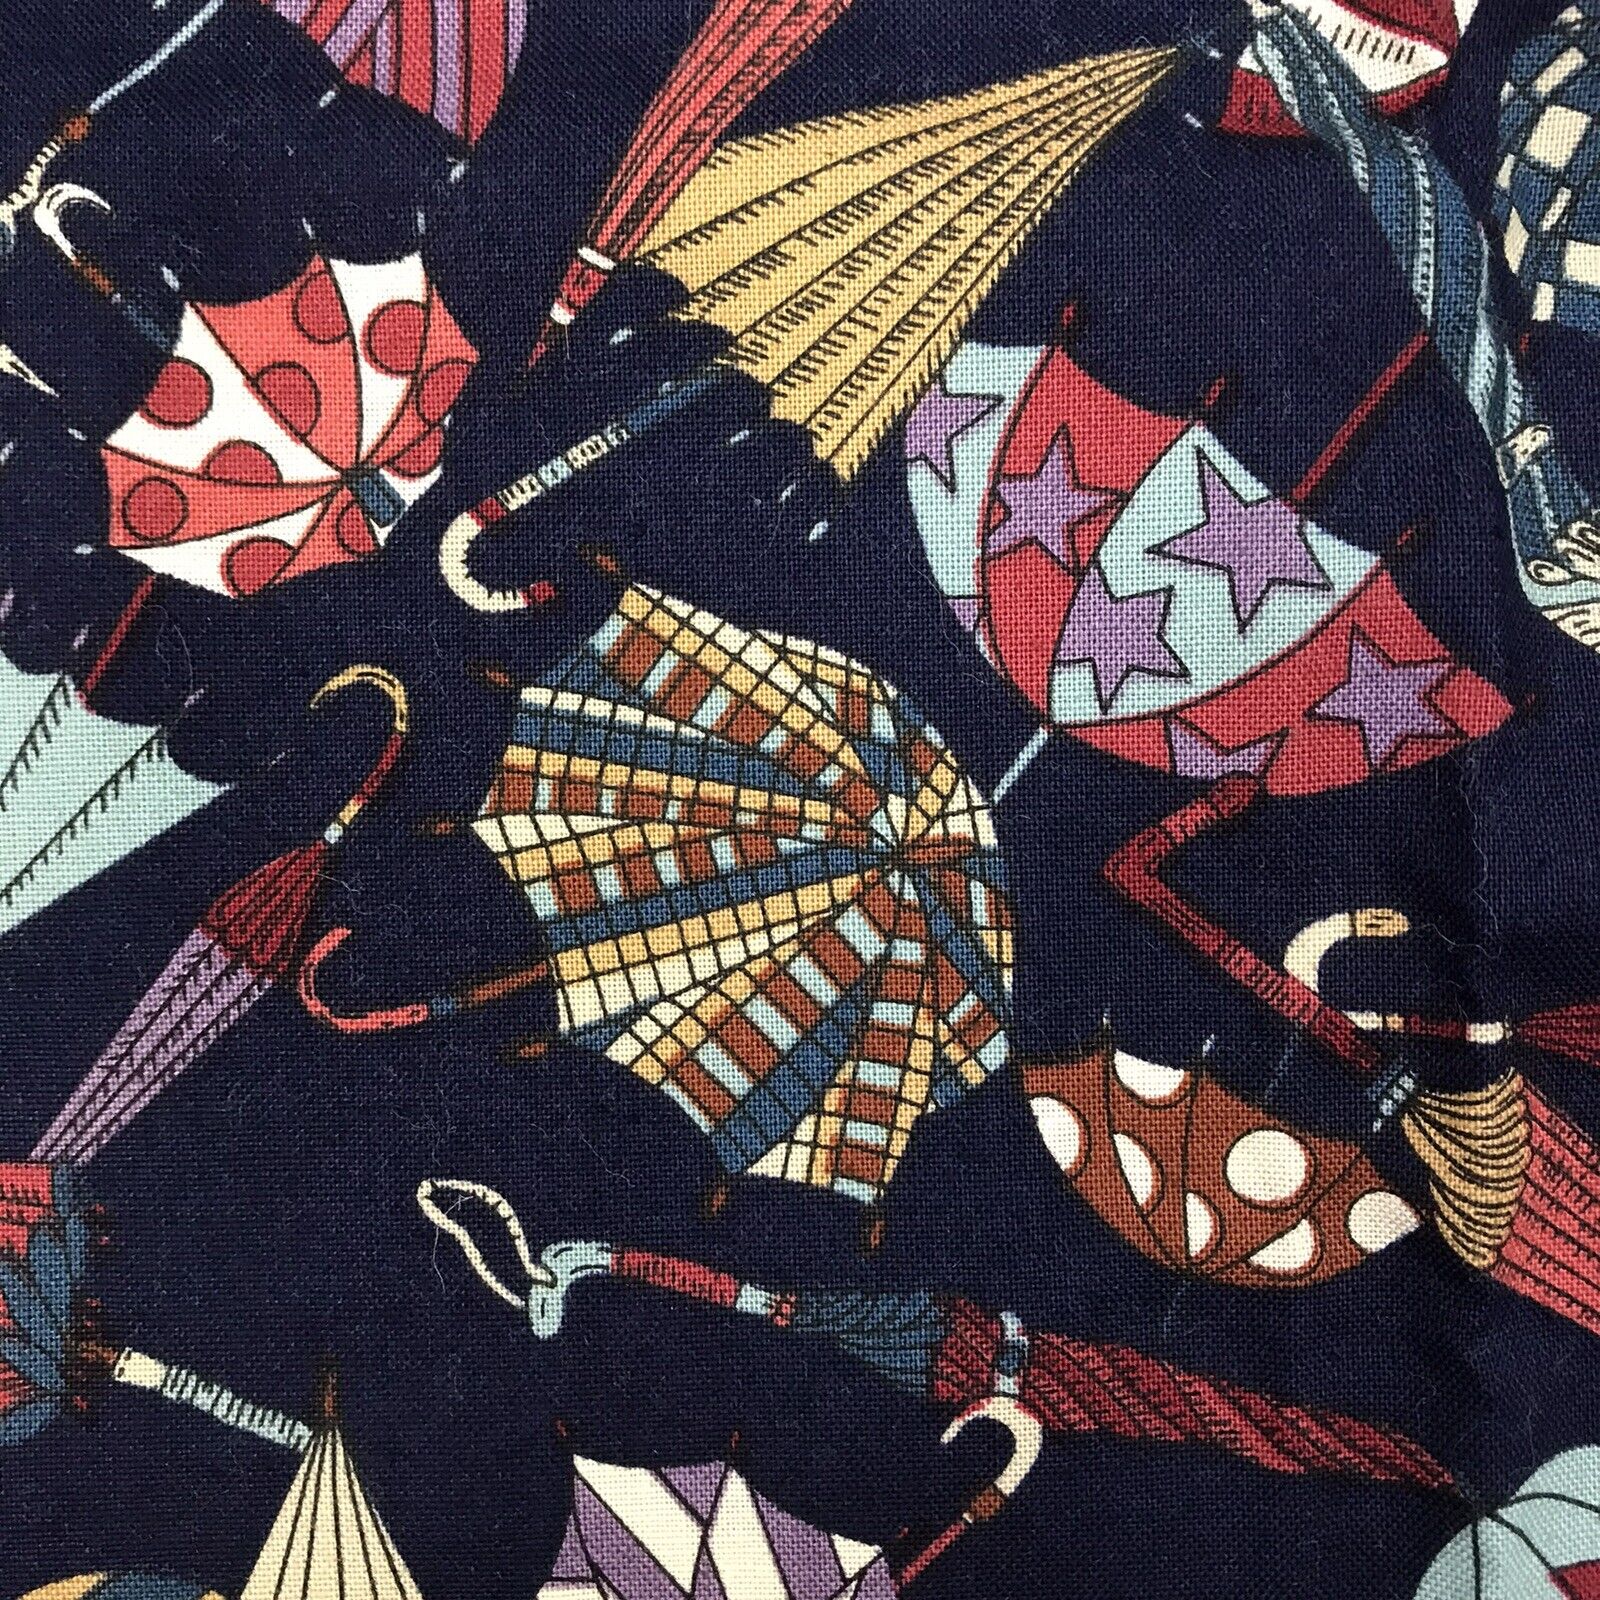 Umbrella Novelty Fabric Quilter\'s Cotton Black Brown Muted Tones 1/3 Yard 